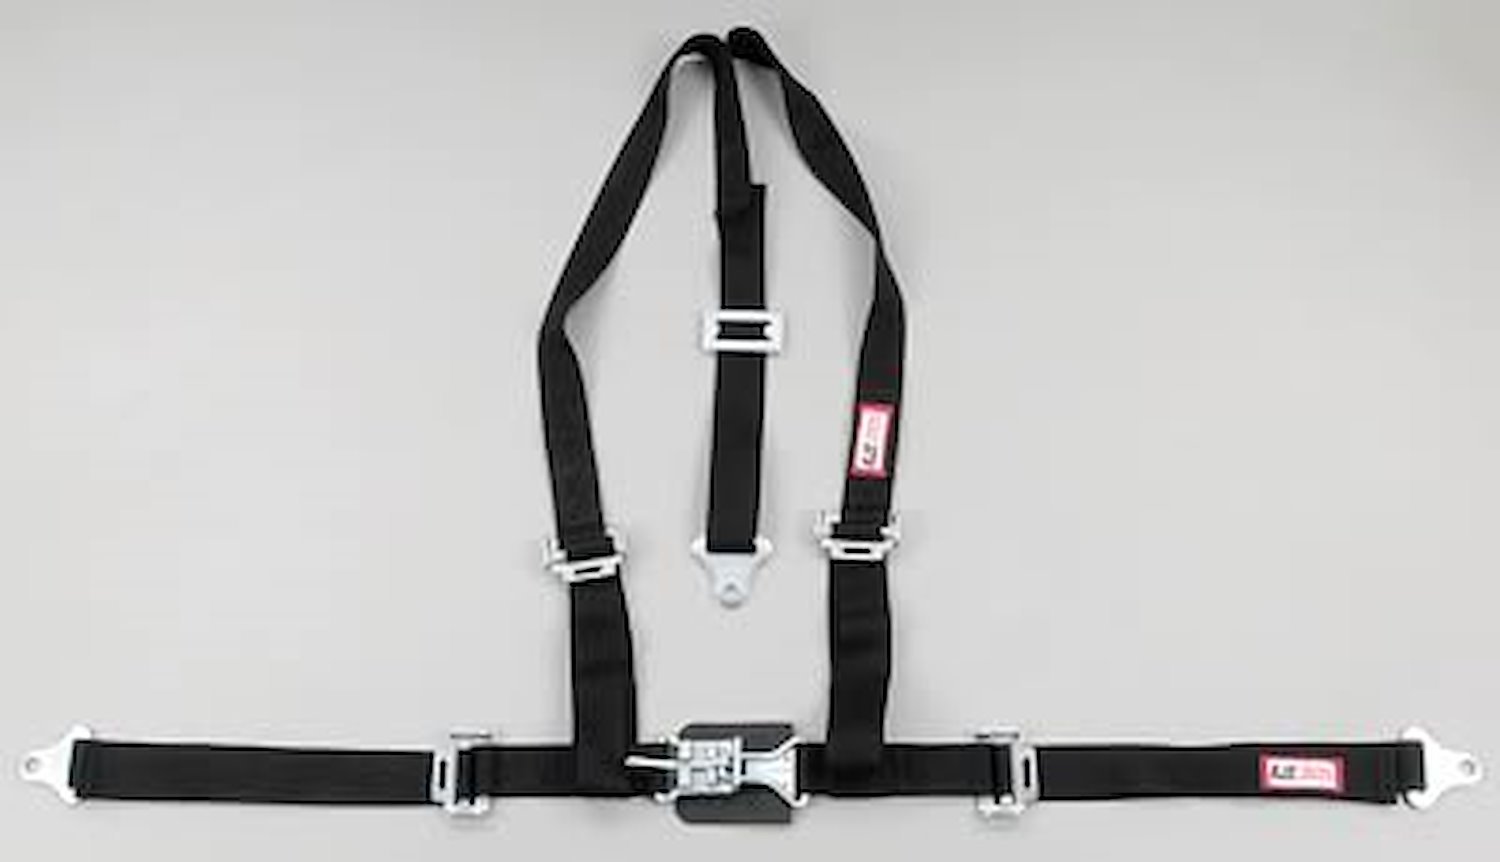 NON-SFI L&L HARNESS 2 PULL DOWN Lap Belt SNAP SEWN IN 2 S.H. Individual ROLL BAR Mount WRAP/SNAP BLACK